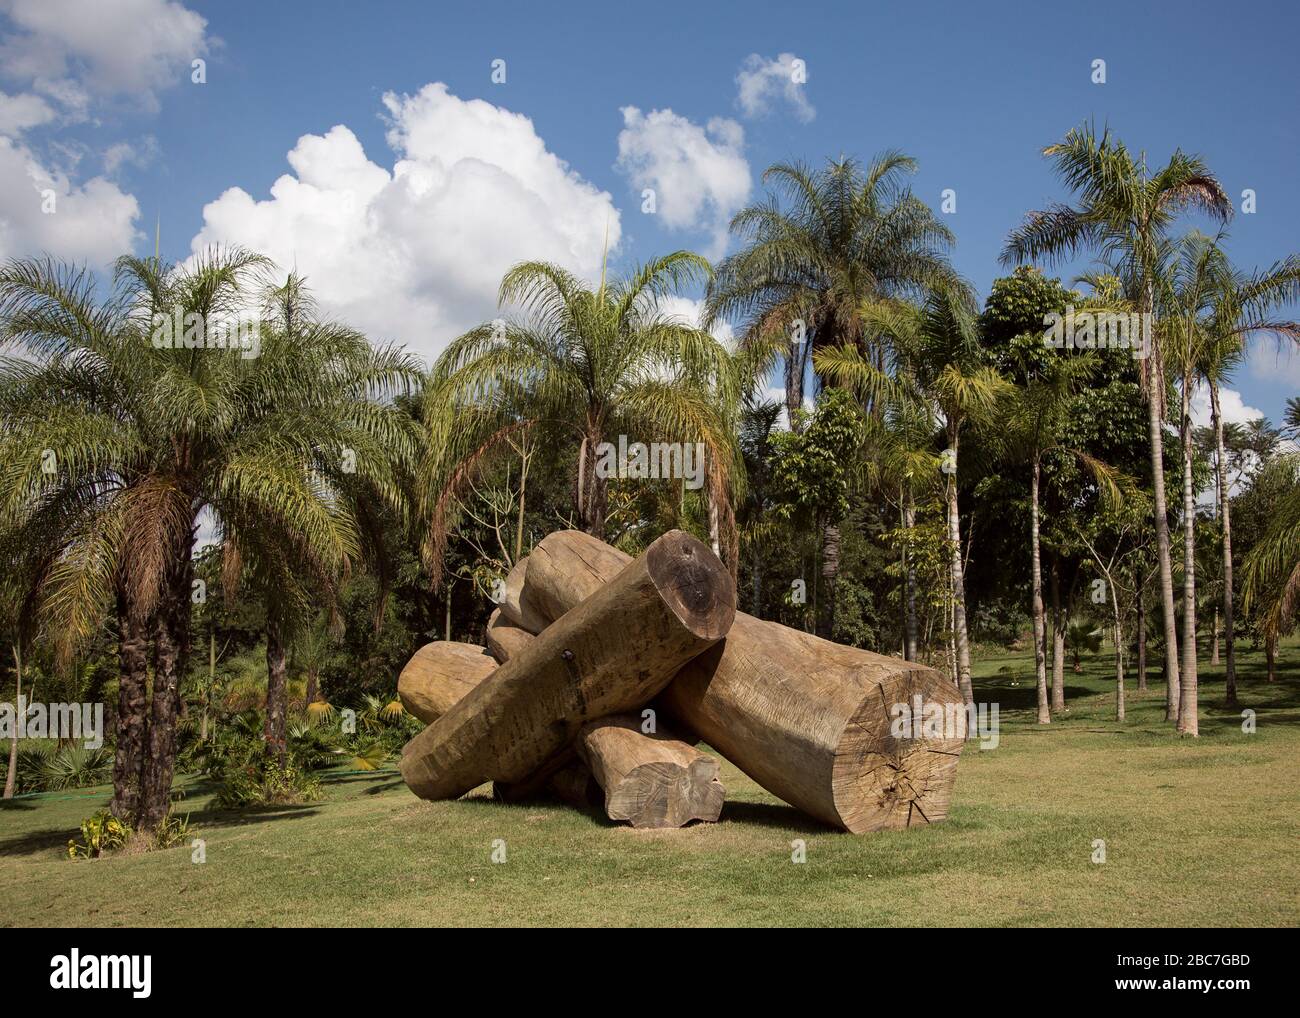 Trees form art at Inhotim The Institute Of Contemporary Art And Botanical Gardens in the state of Minas Gerais, Brazil Stock Photo